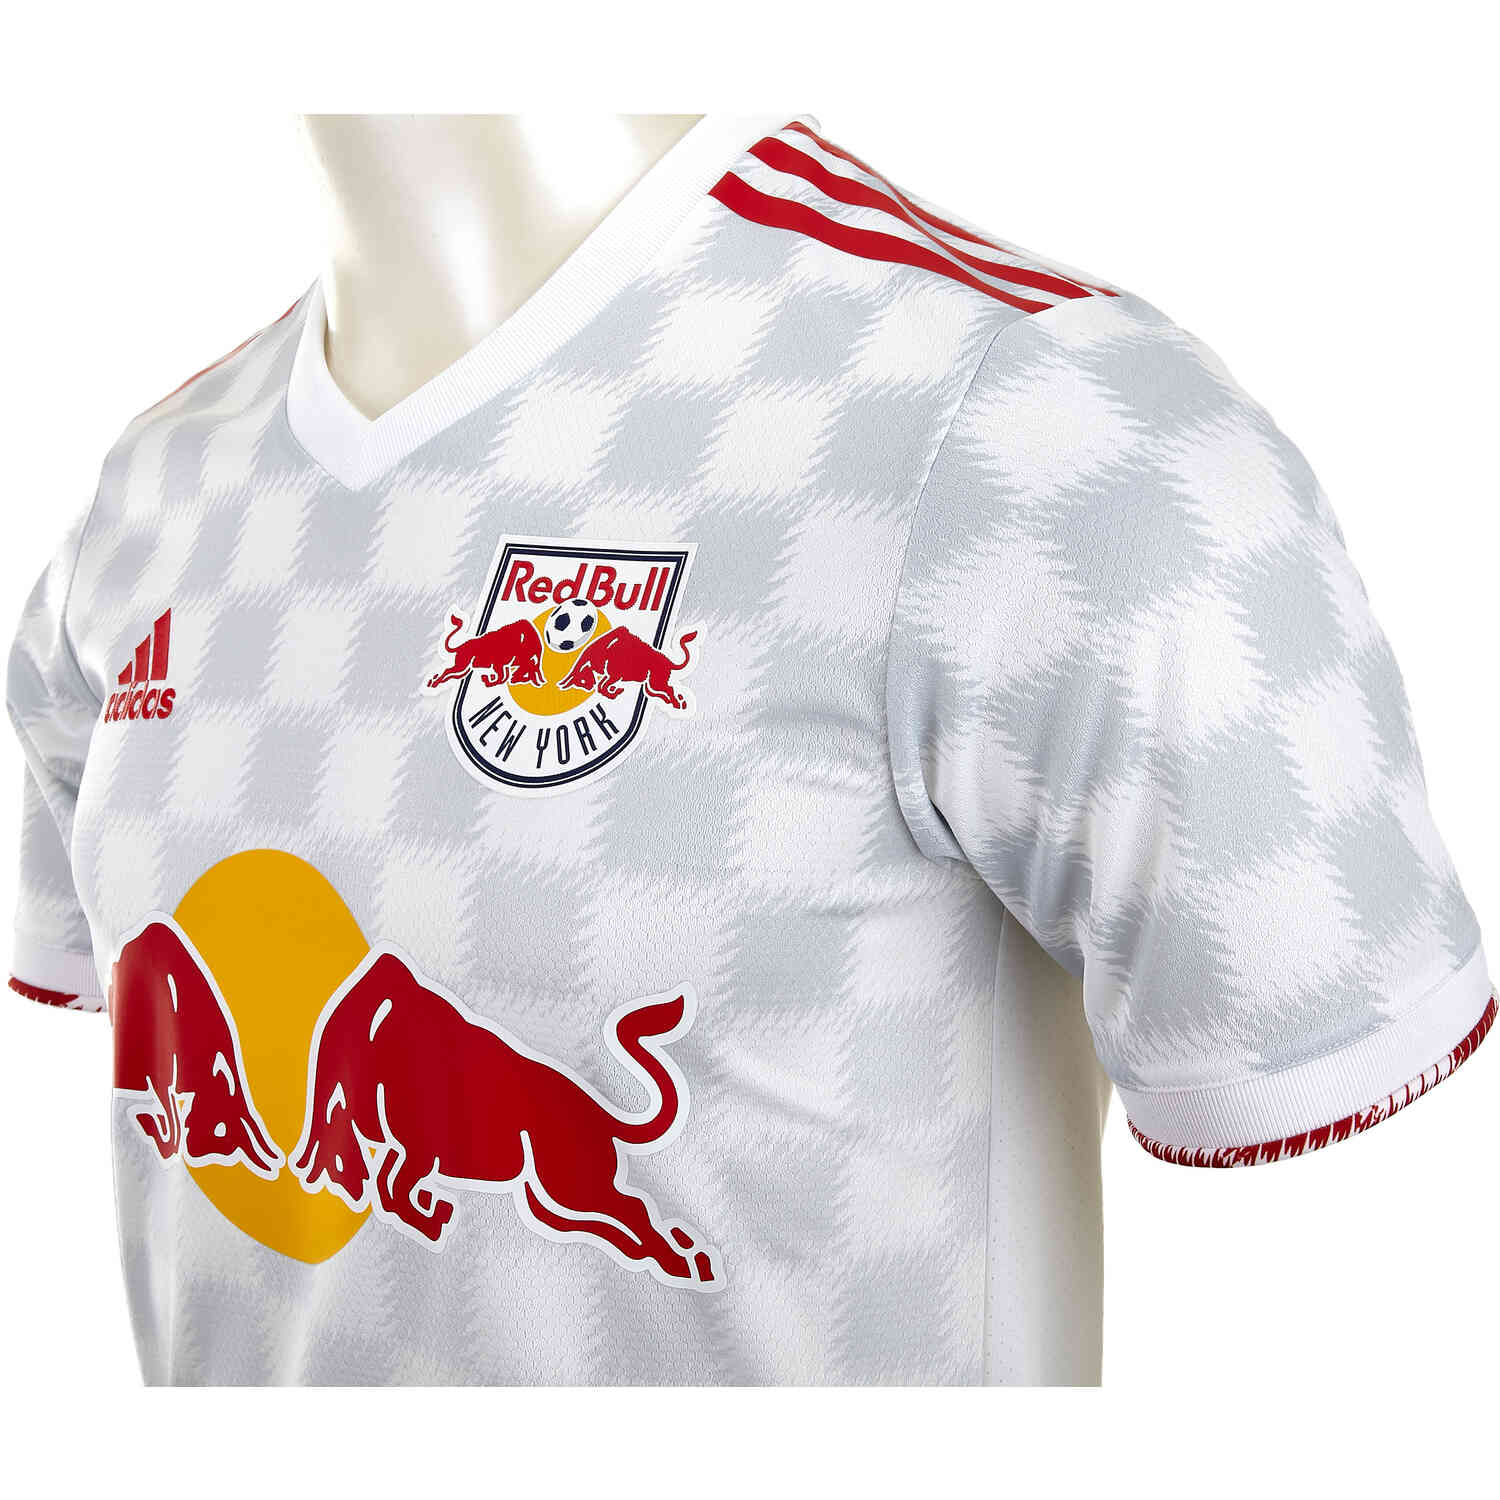 2021 adidas NYRB Home Authentic Jersey - SoccerPro